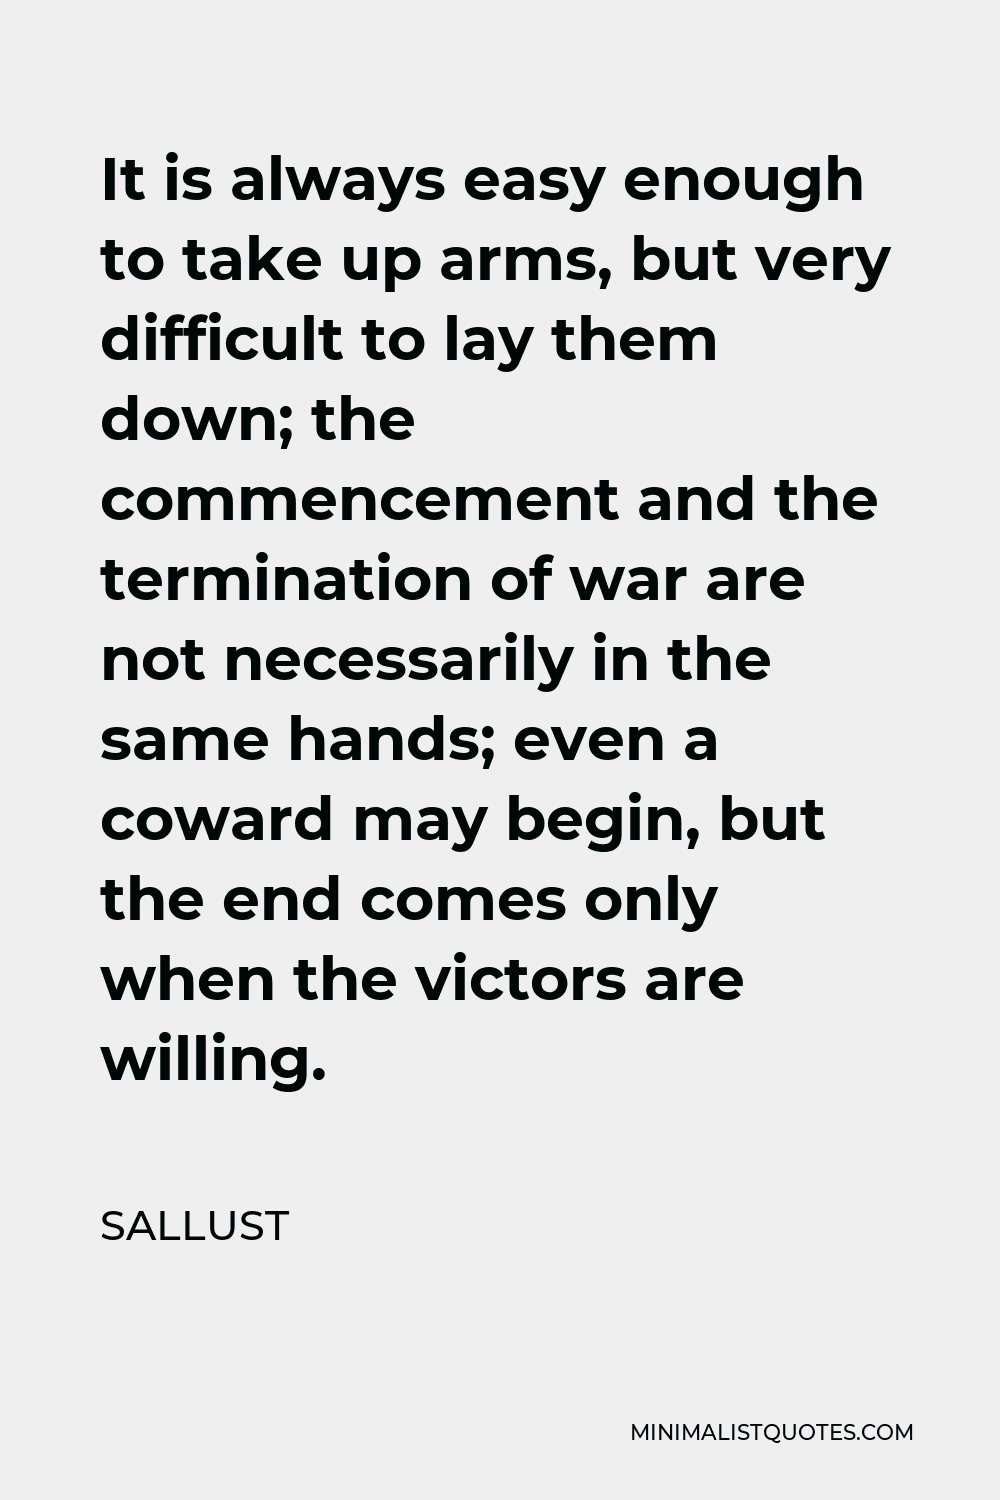 Sallust Quote - It is always easy enough to take up arms, but very difficult to lay them down; the commencement and the termination of war are not necessarily in the same hands; even a coward may begin, but the end comes only when the victors are willing.